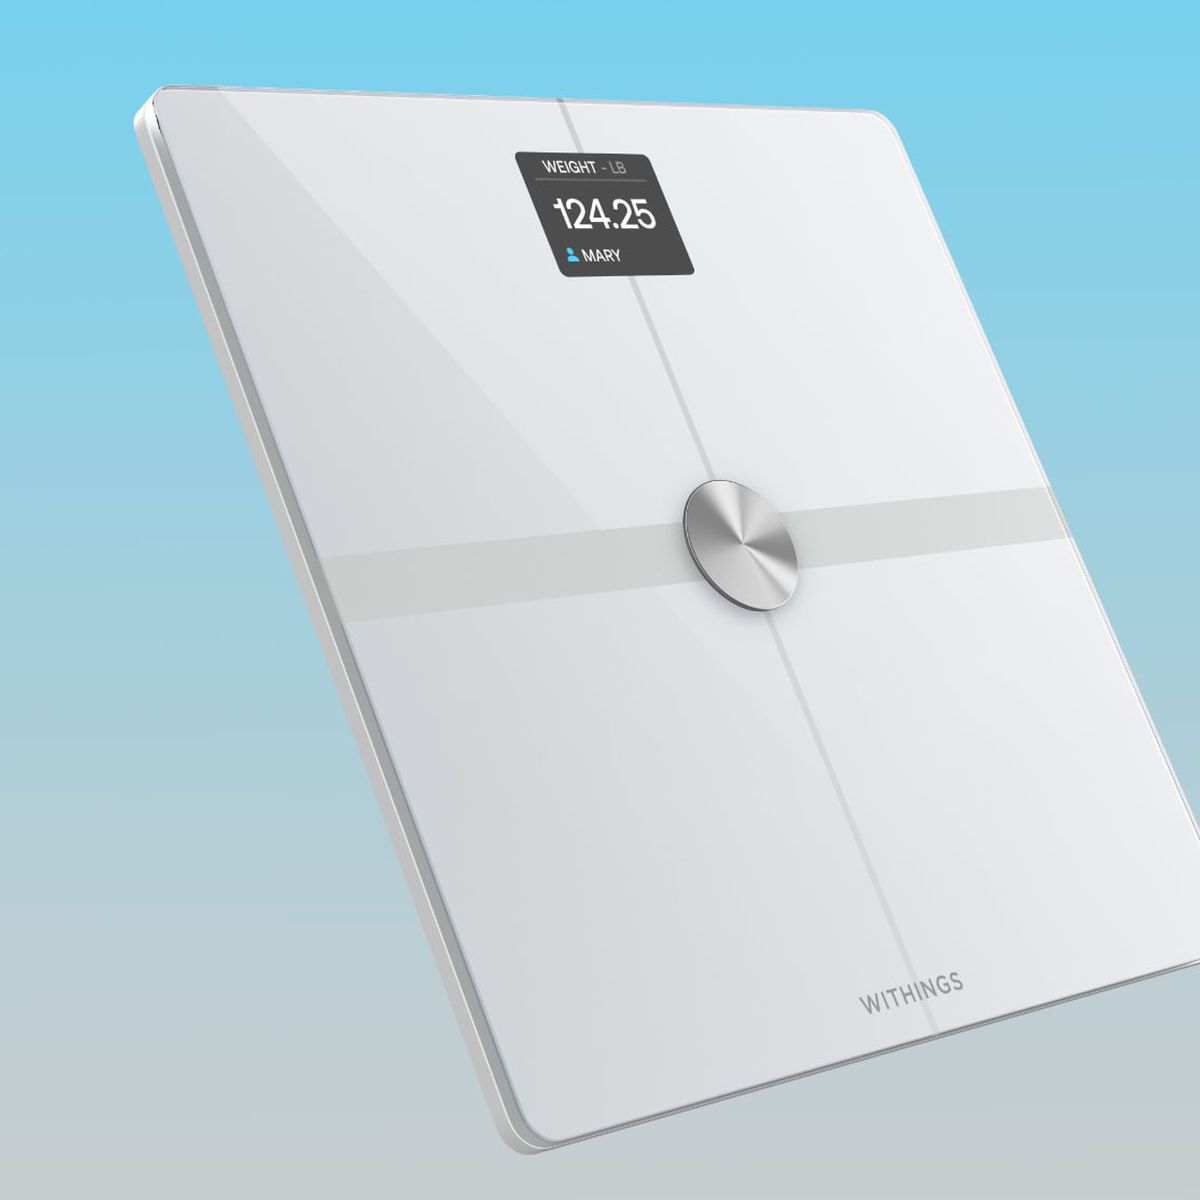 Withings Launches New iPhone-Connected Smart Scale With 'Eyes